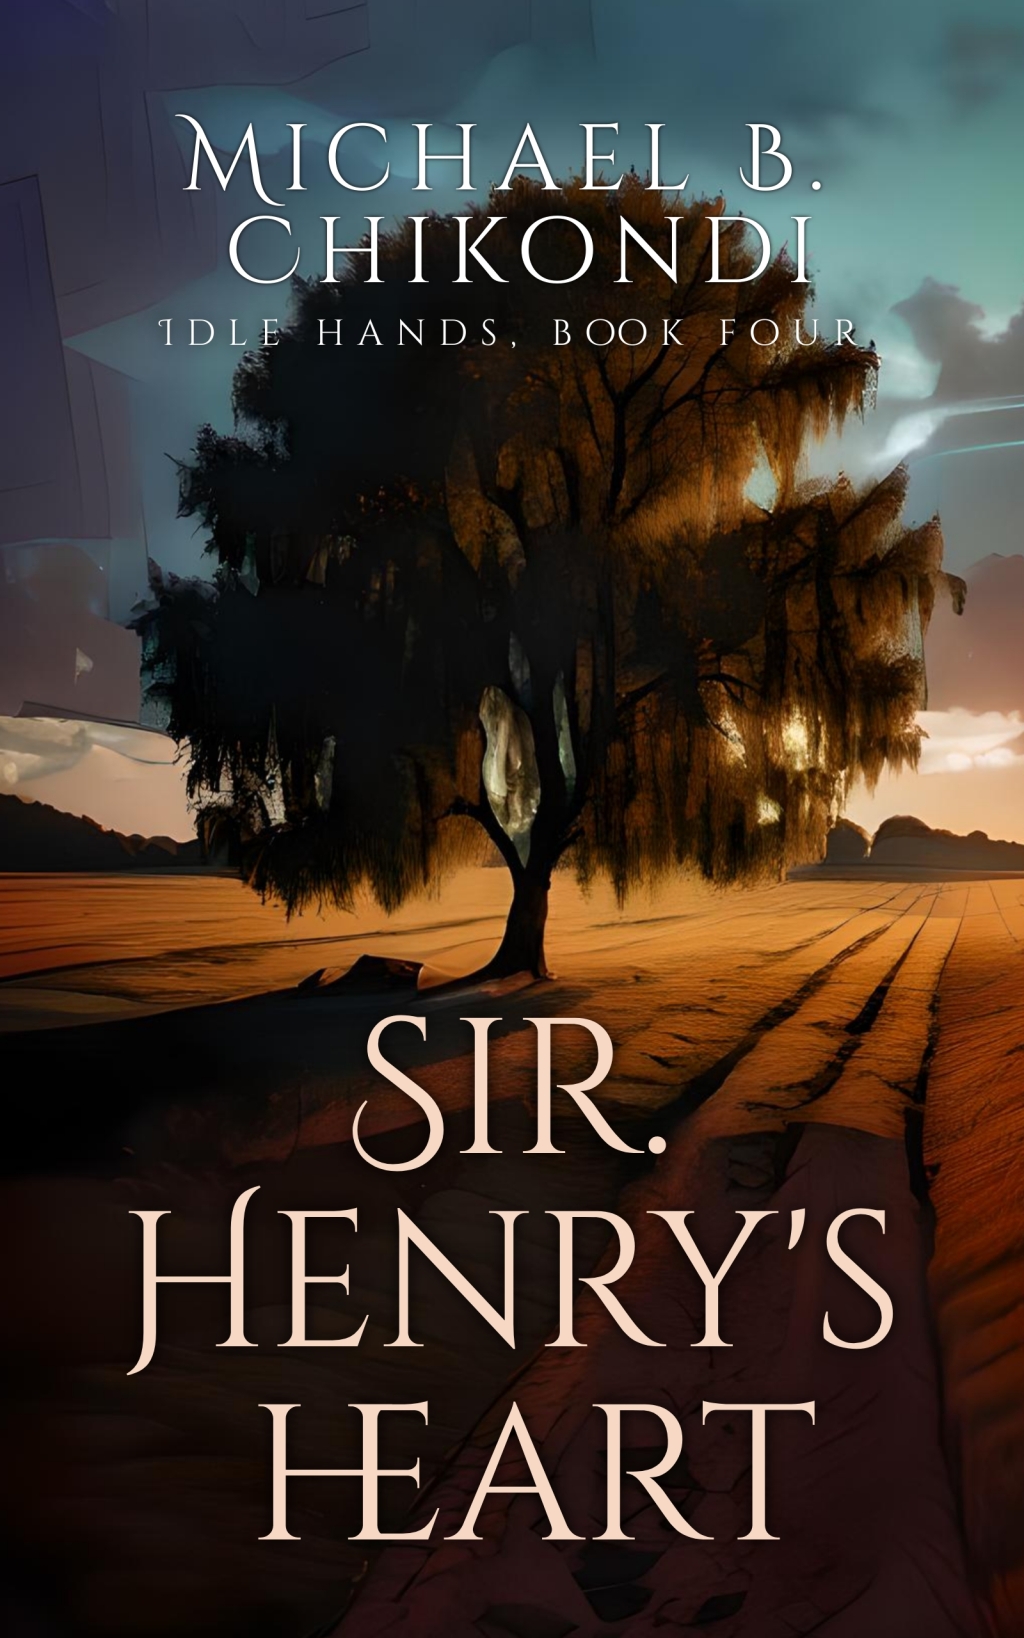 Review for Sir. Henry’s heart